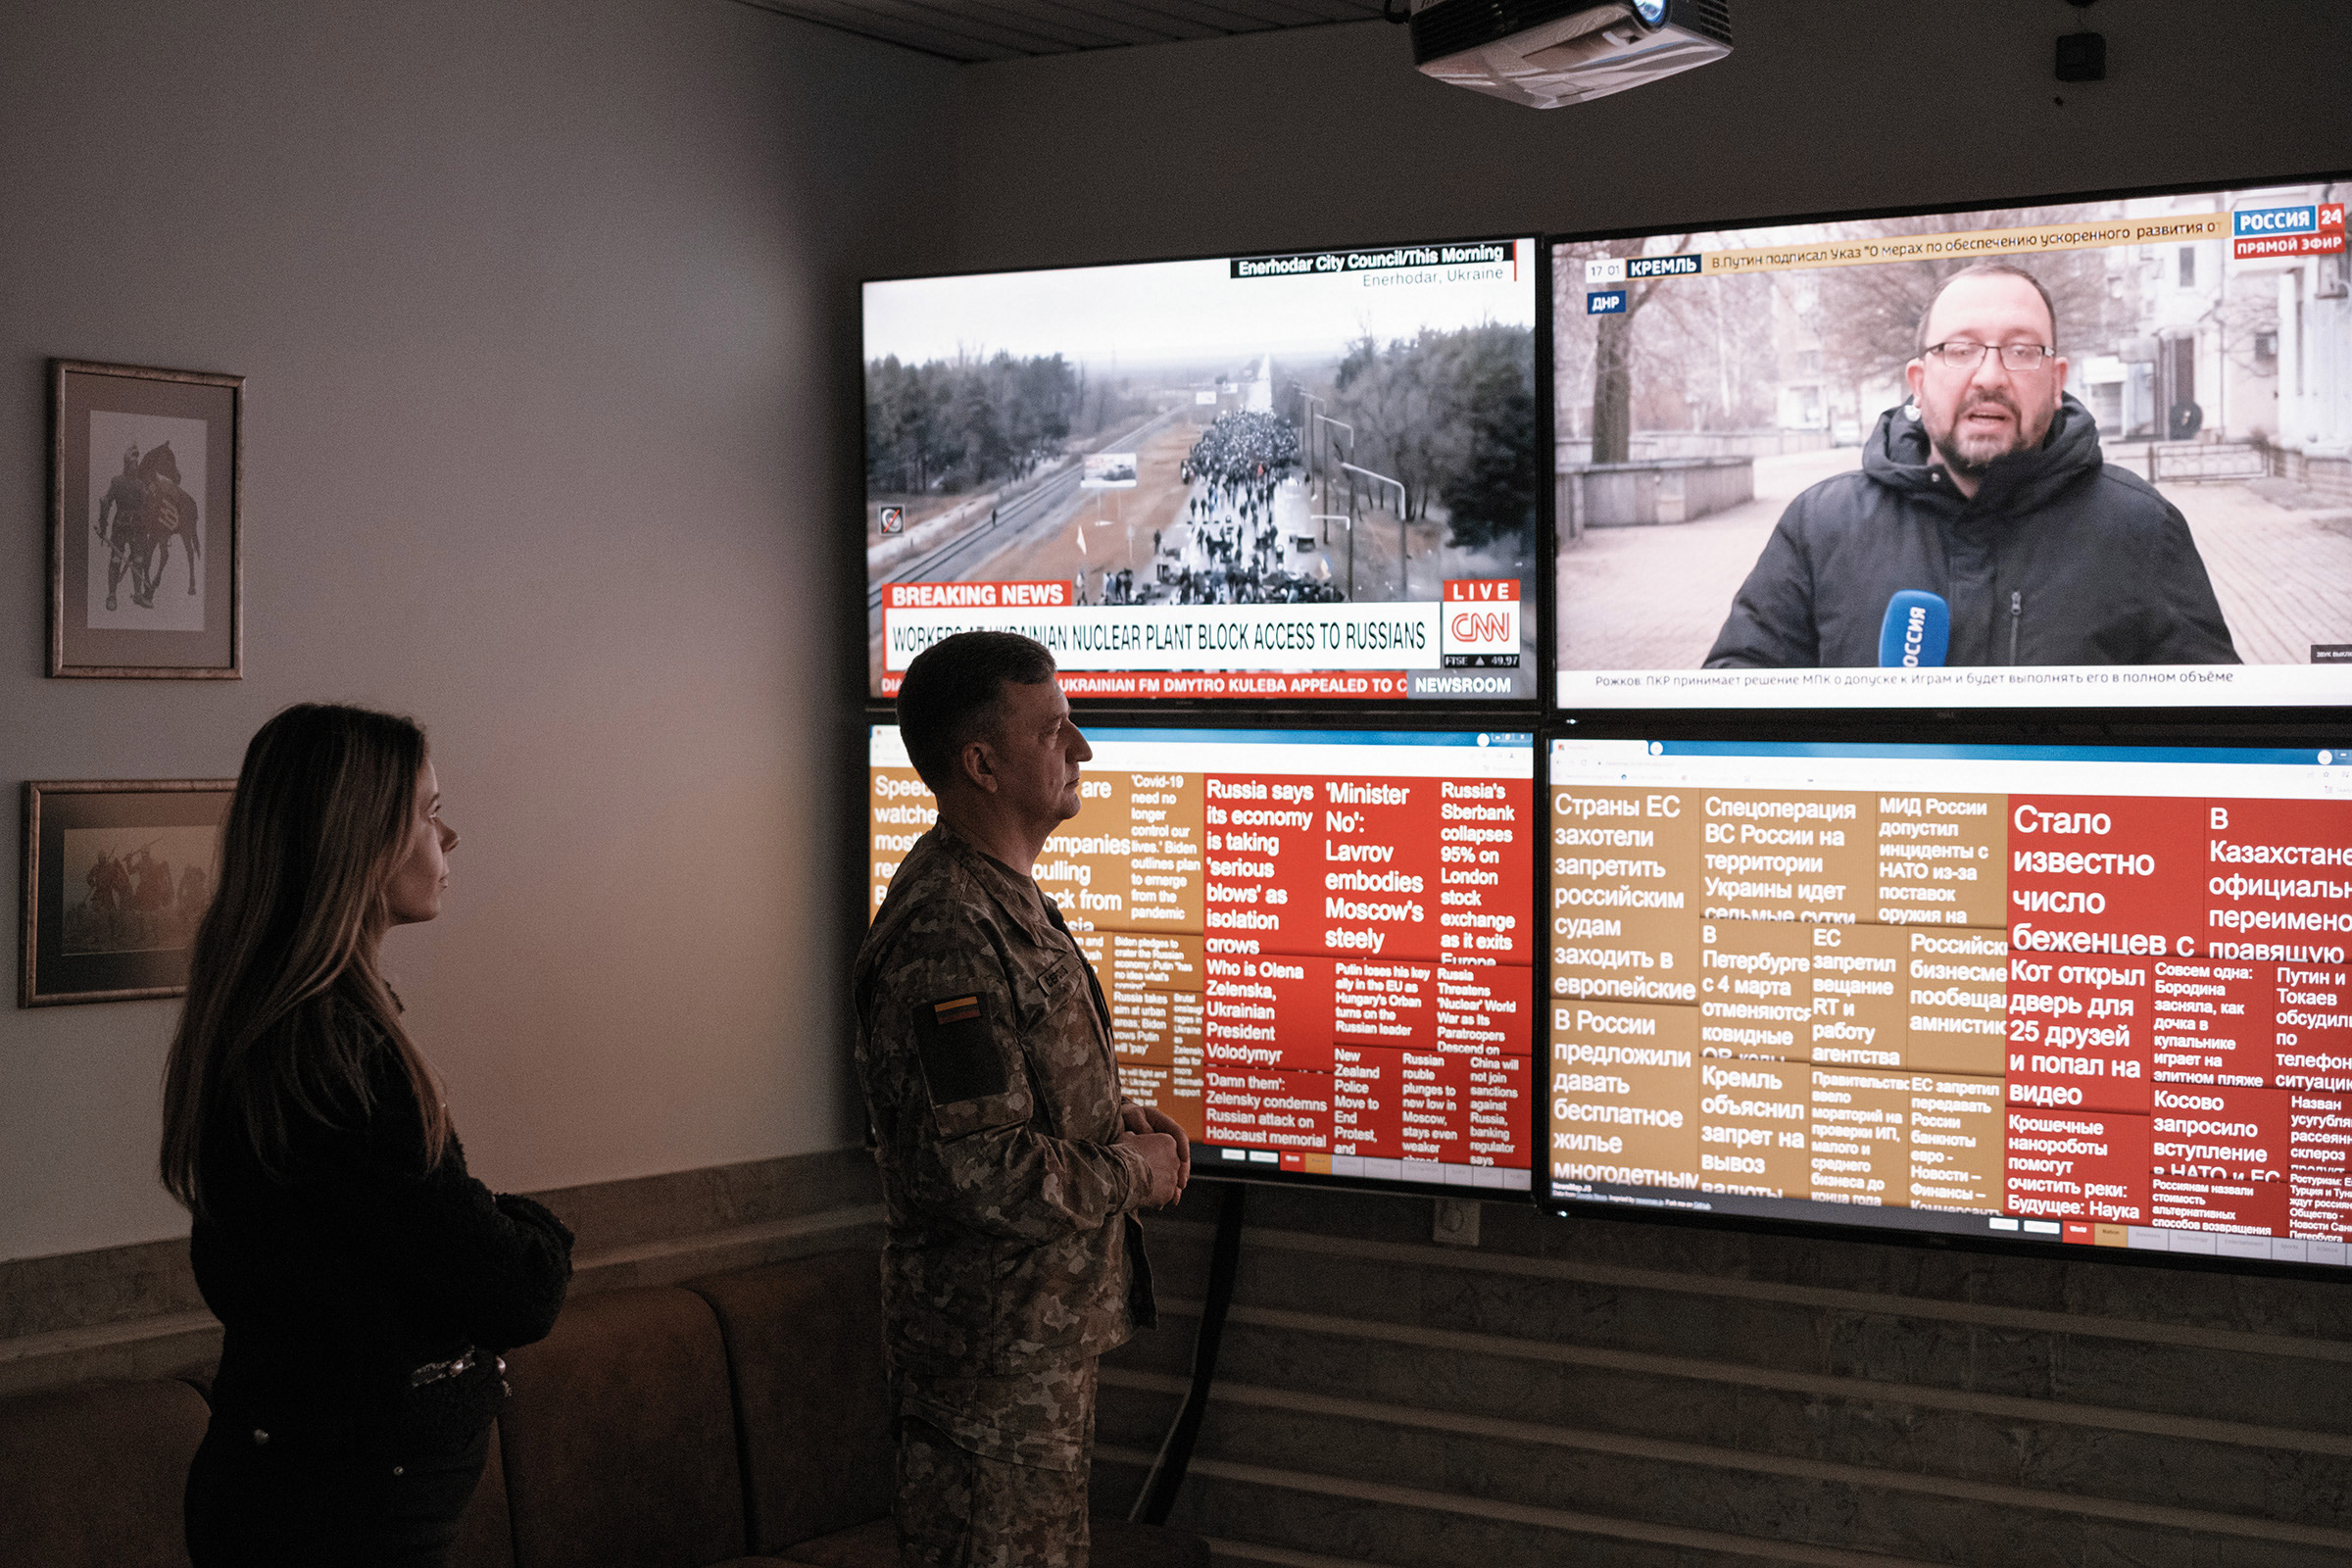 Tomas Čeponis, Senior Specialist in the Counter-Hybrid Response Group, and Dominyka Daškevičiūtė, Analyst at the Lithuanian Armed Forces, analyse daily information from different channels and sources. Vilnius, Lithuania.